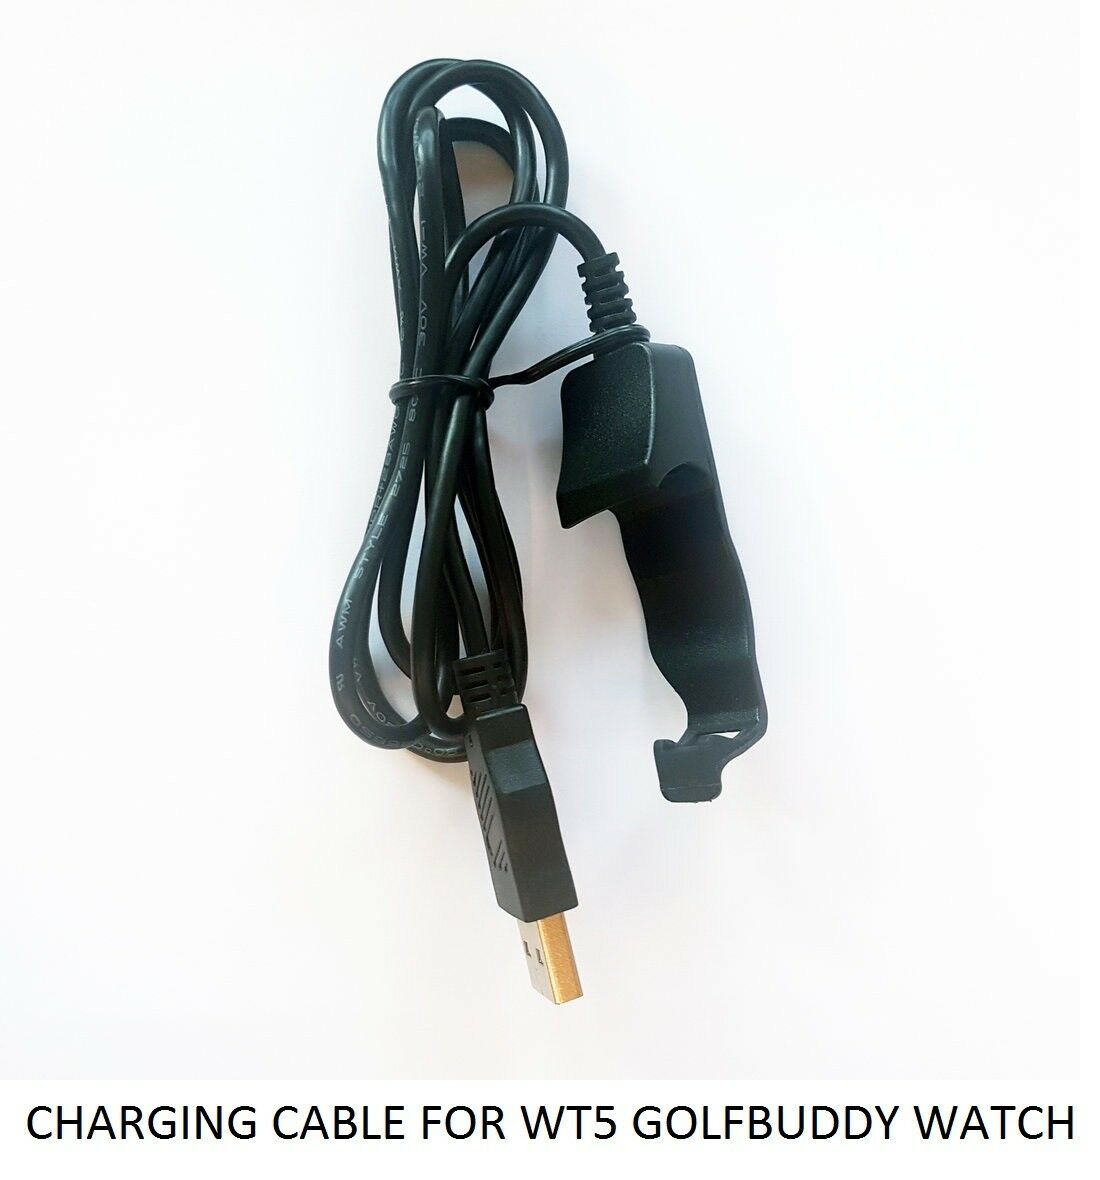 Wt5 Usb Charging Cable For Golf Buddy Watch New  Golfbuddy W T 5 Charger